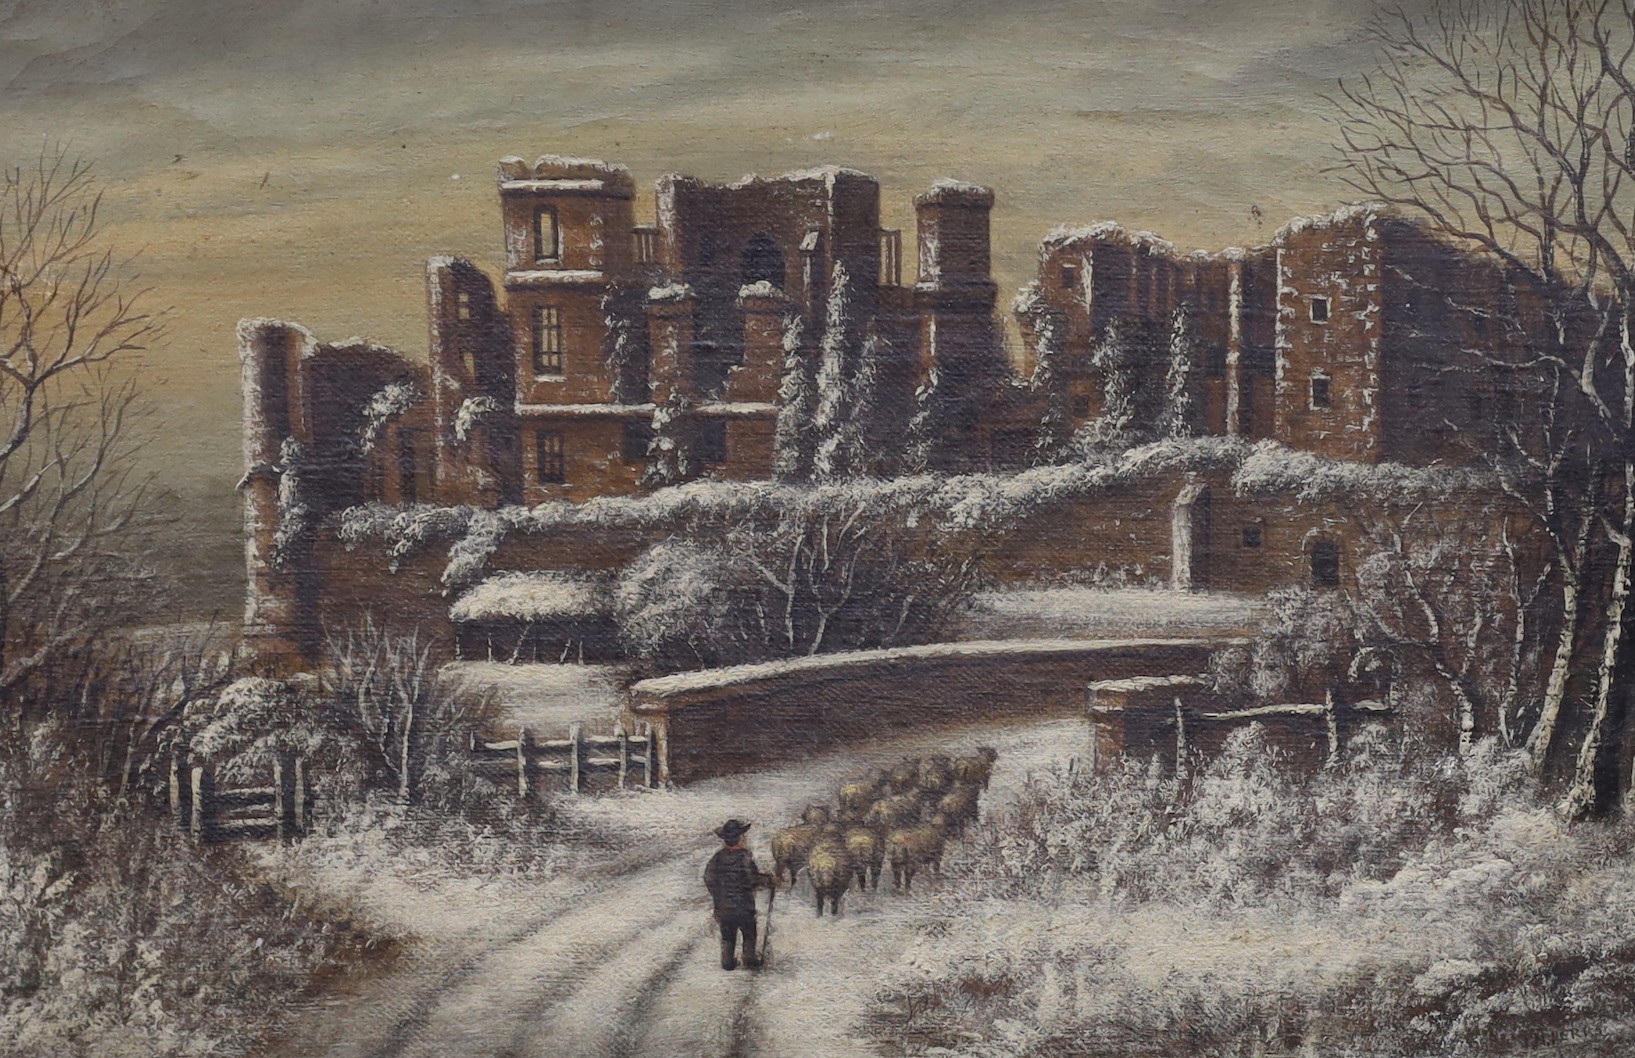 J.H. Perks, pair of oils on canvas, Views of castles in summer and winter, one signed, 30 x 45cm